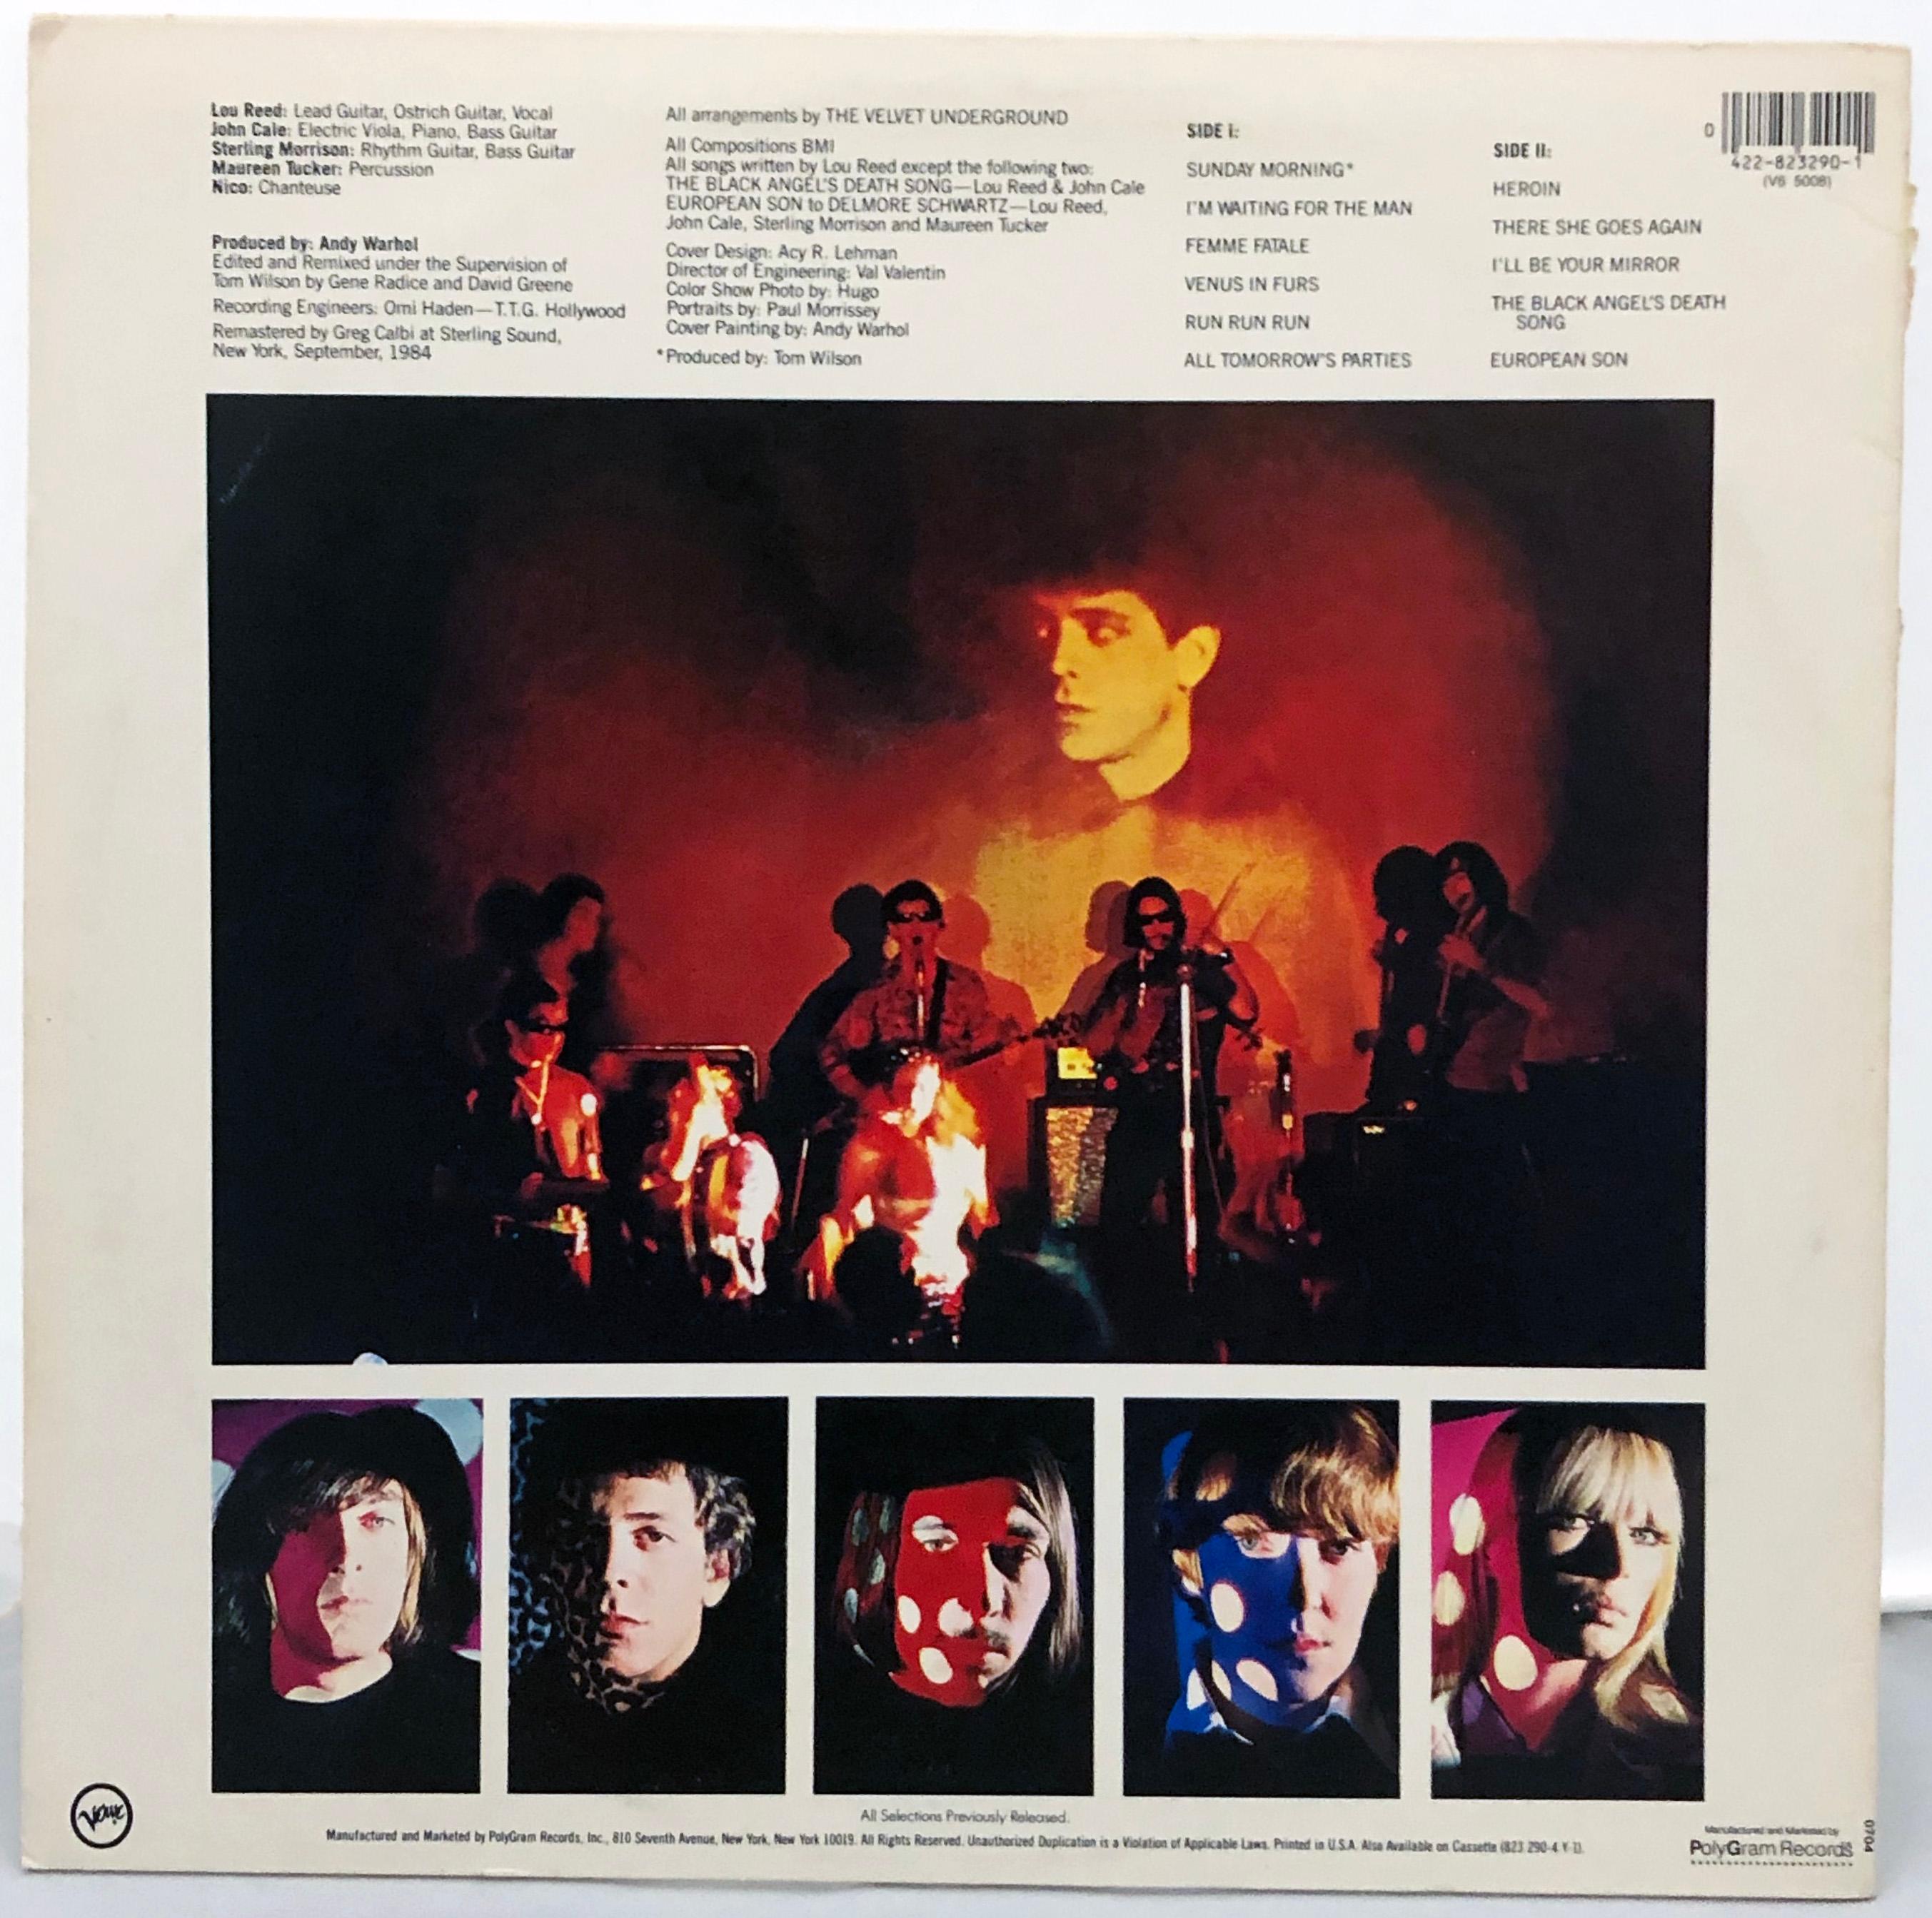 Andy Warhol Banana Cover Art
The Velvet Underground & Nico Vinyl Record circa early 1980's featuring original Record Cover Art by Andy Warhol

Medium: Off Set Lithograph on record sleeve
Dimensions: 12 x 12 inches (30.48 x 30.48 cm)
Some minor shelf